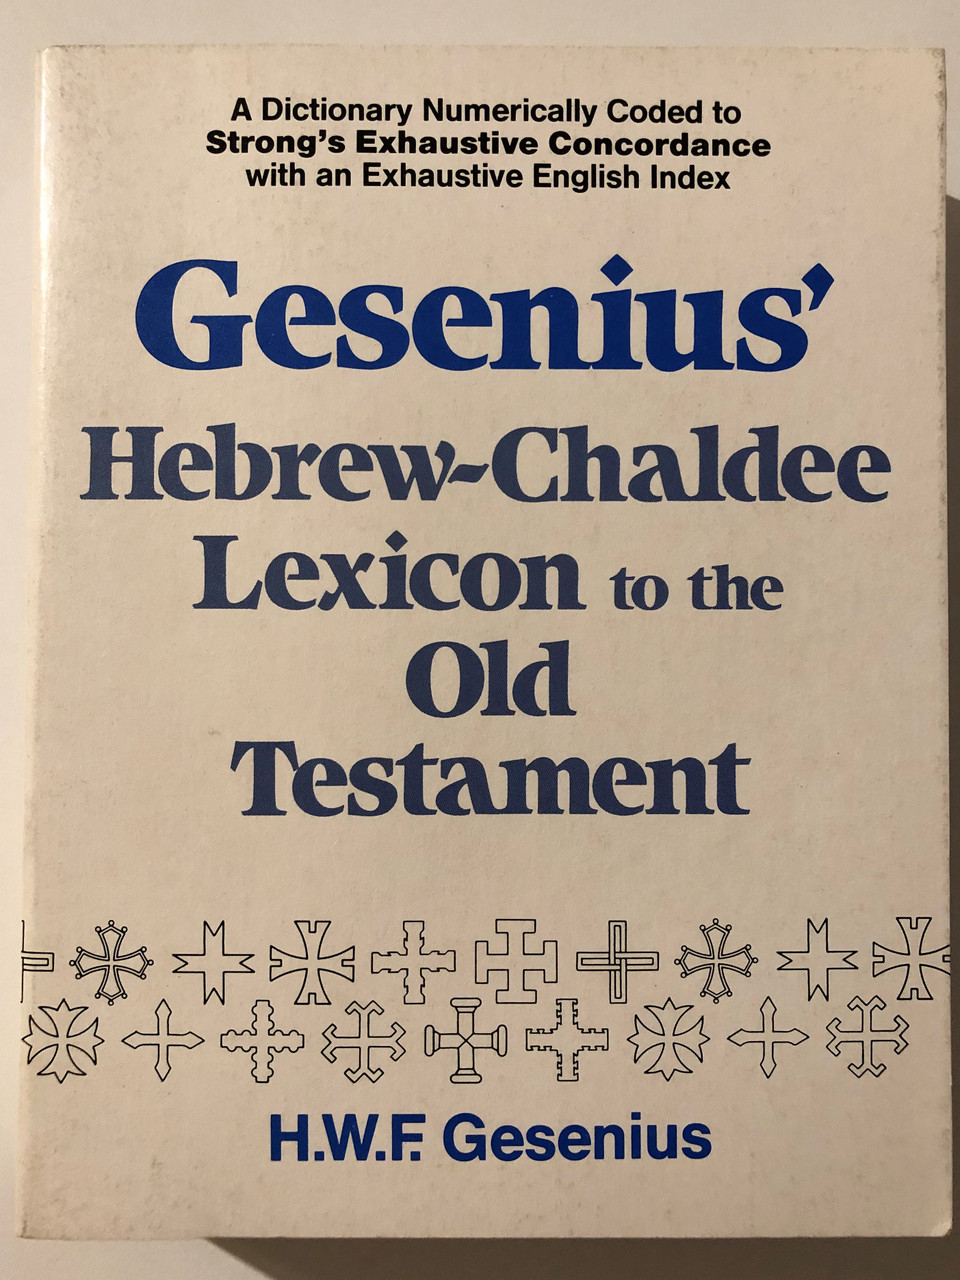 https://cdn10.bigcommerce.com/s-62bdpkt7pb/products/0/images/263534/1_Gesenius_Hebrew_and_Chaldee_Lexicon_to_the_Old_Testament_Scriptures_Numerically_Coded_to_Strongs_Exhaustive_0801037360_1__31634.1673176057.1280.1280.JPG?c=2&_gl=1*1k33akd*_ga*MjAyOTE0ODY1OS4xNTkyNDY2ODc5*_ga_WS2VZYPC6G*MTY3MzE3MTc4MS4yNjExLjEuMTY3MzE3NTk1OS42MC4wLjA.